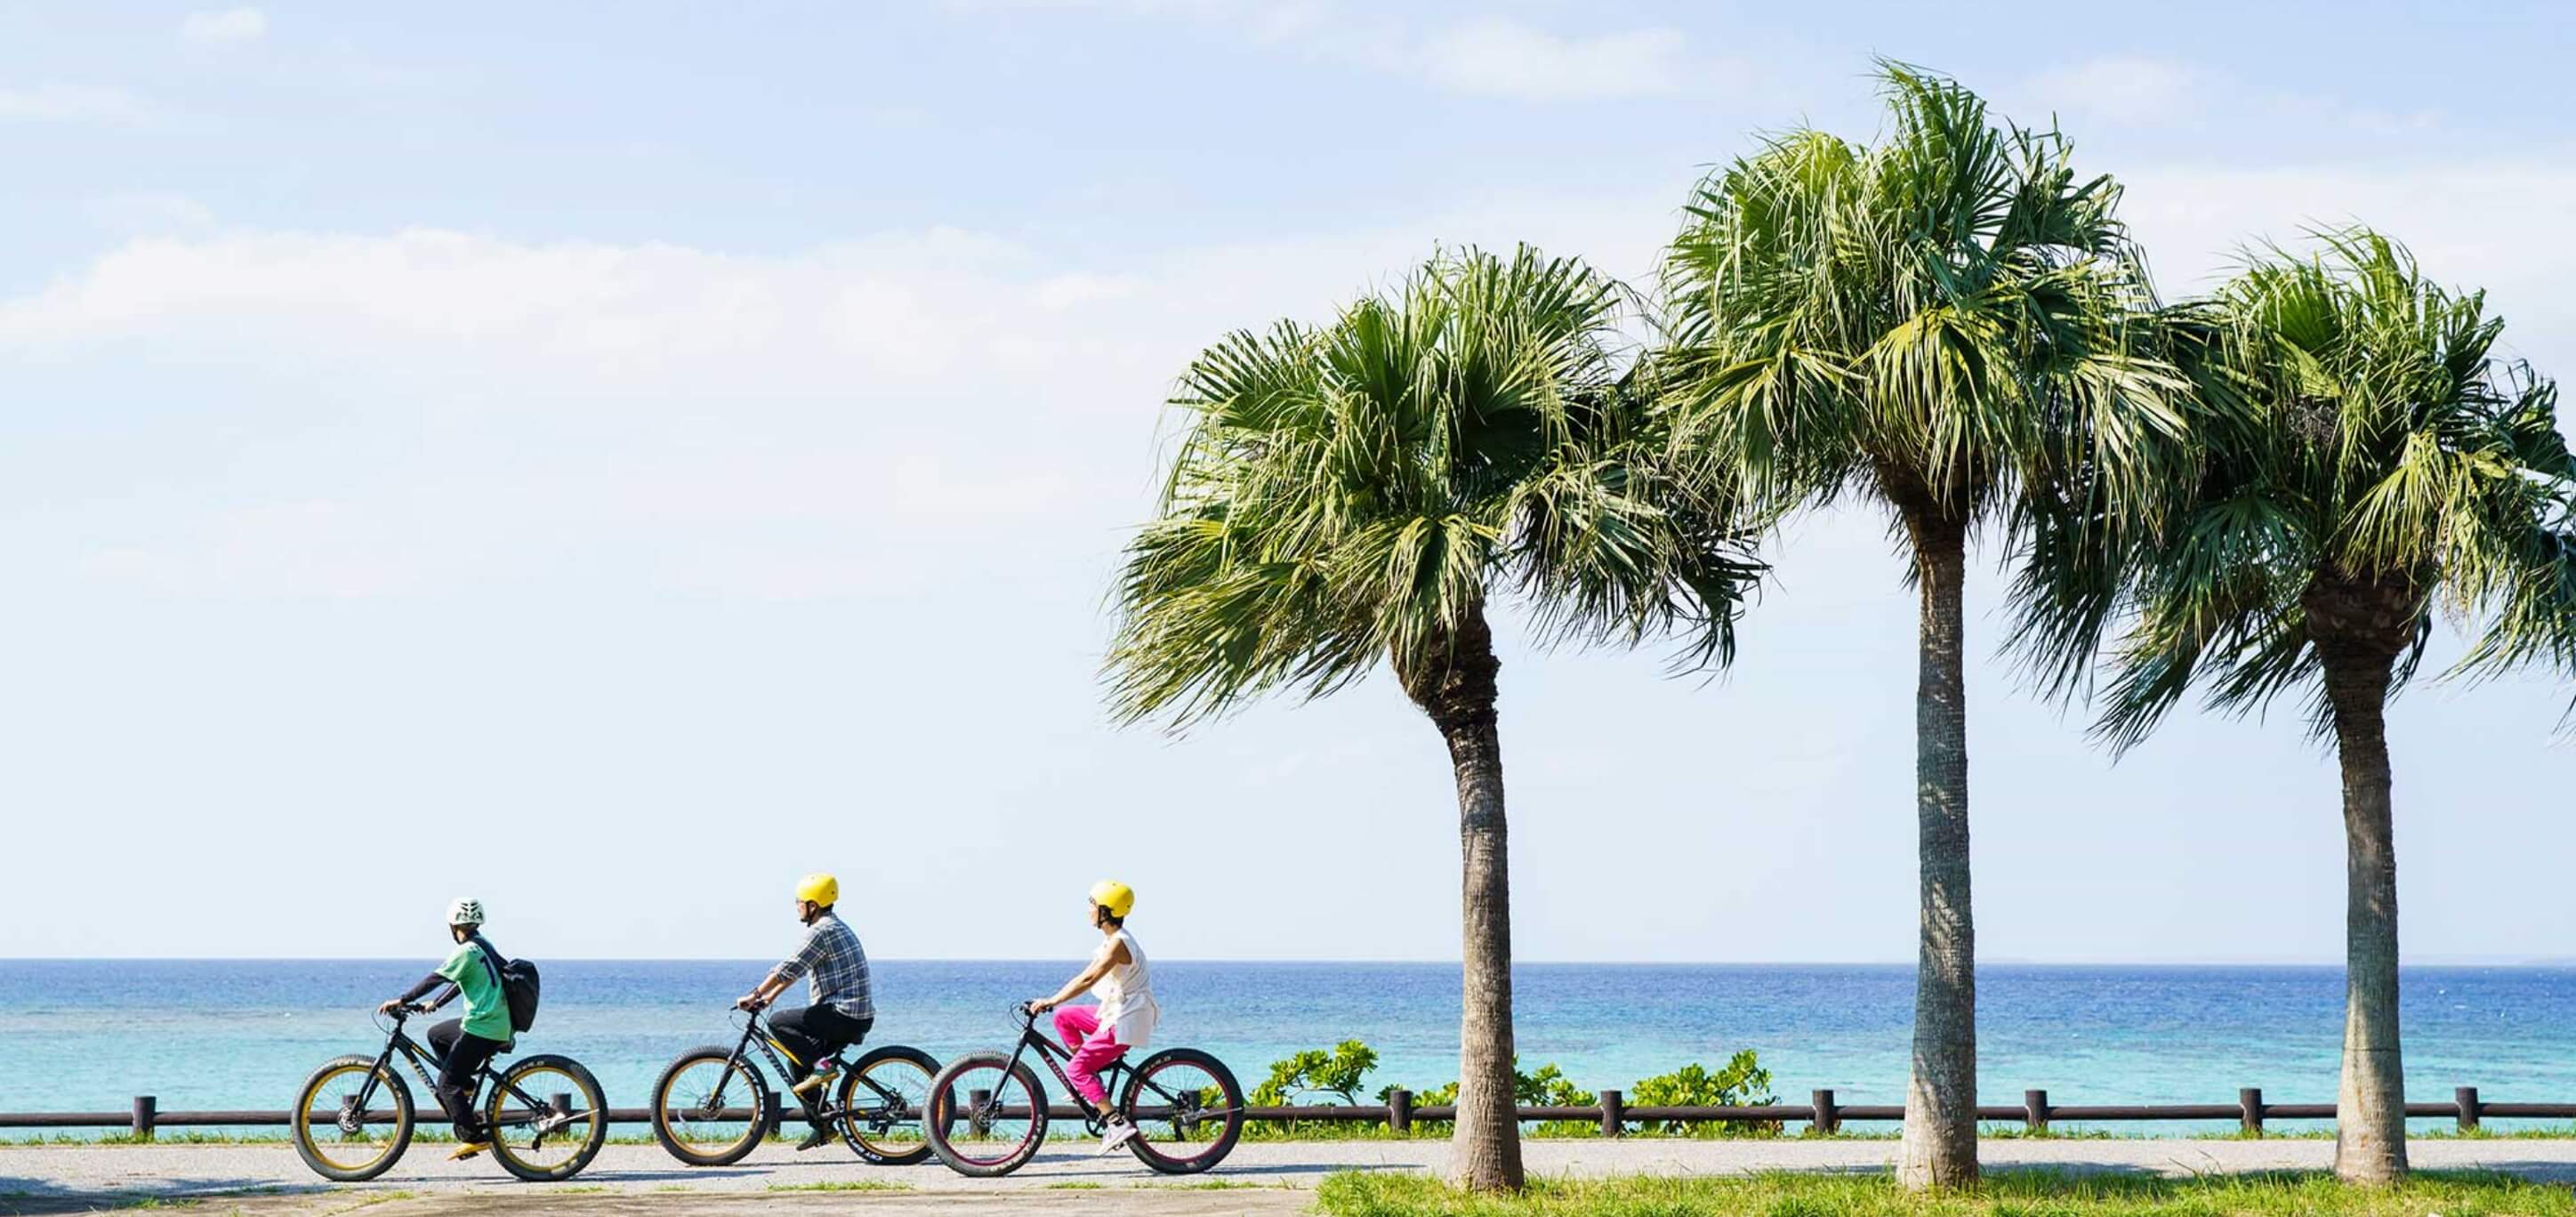 A cycling tour that leaves from the hotel will take you through beautiful neighborhood scenery.